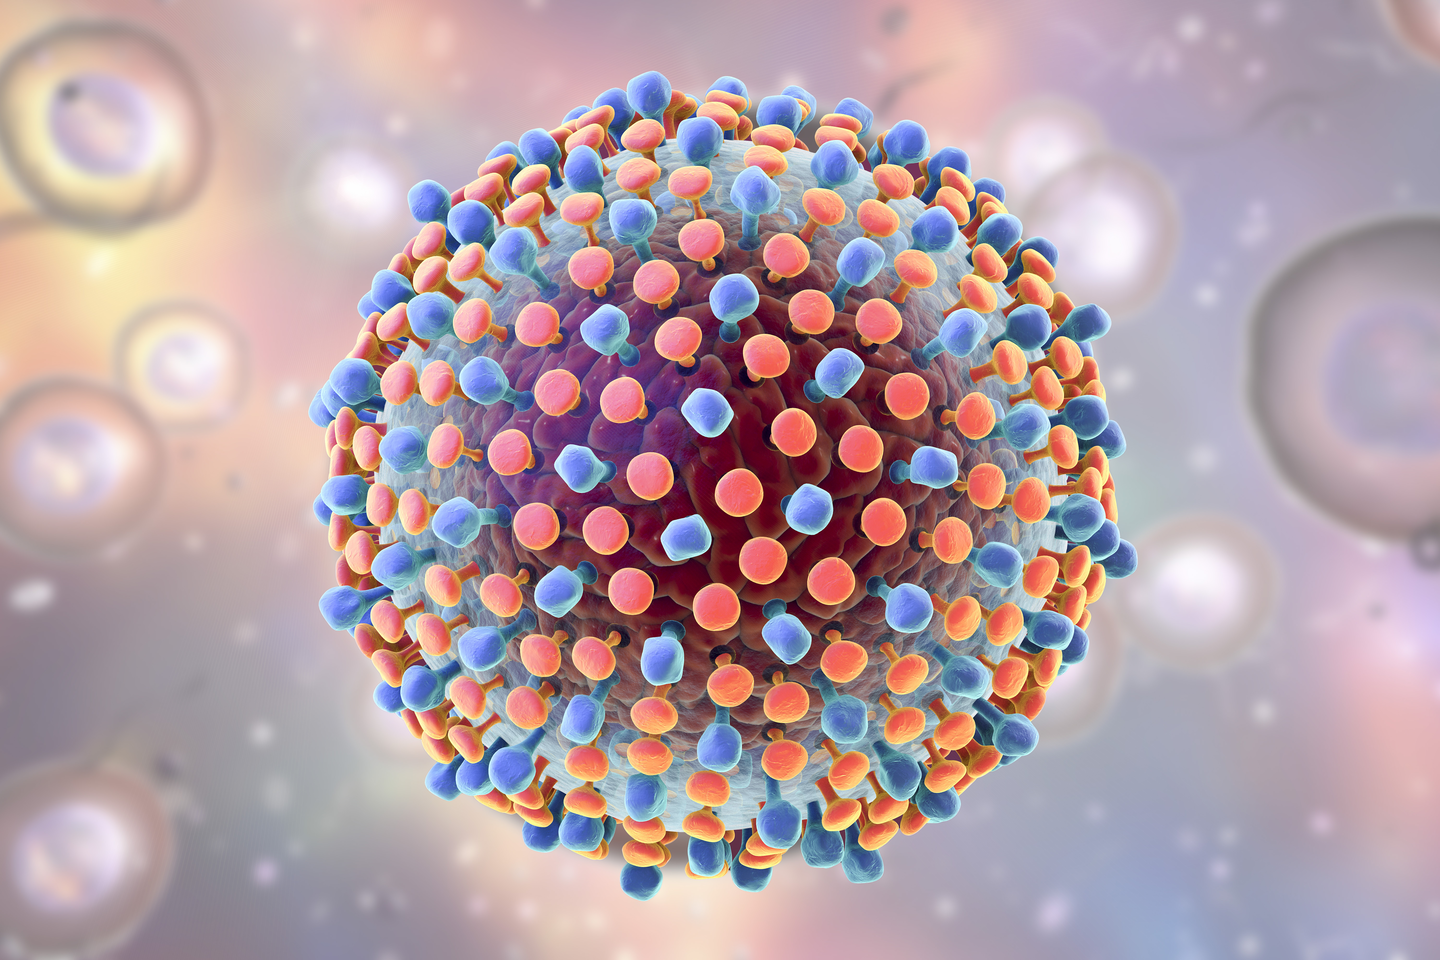 New Research May Lead to Improved Treatment Pathways for Hepatitis C